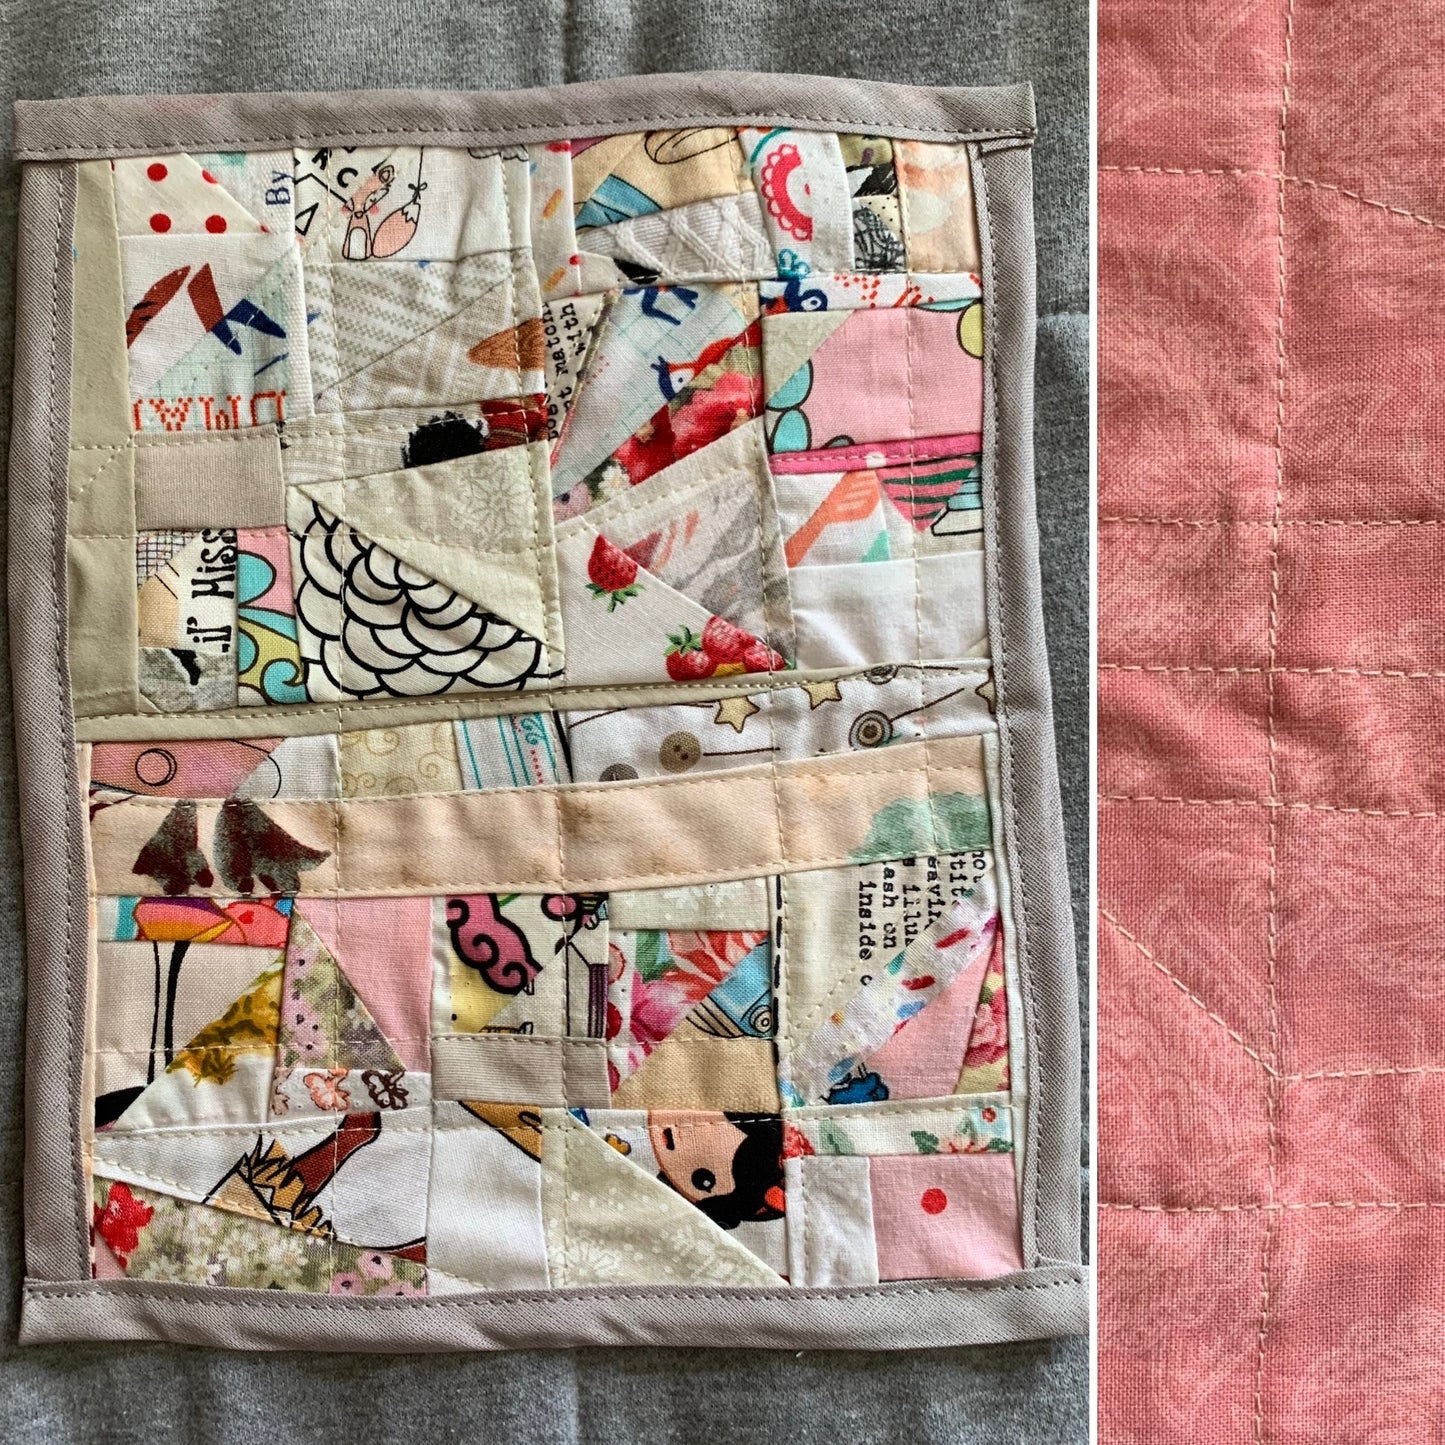 Dollhouse Quilt - 1:12 Scale Scrappy Throw - Choose Your Color Combo!